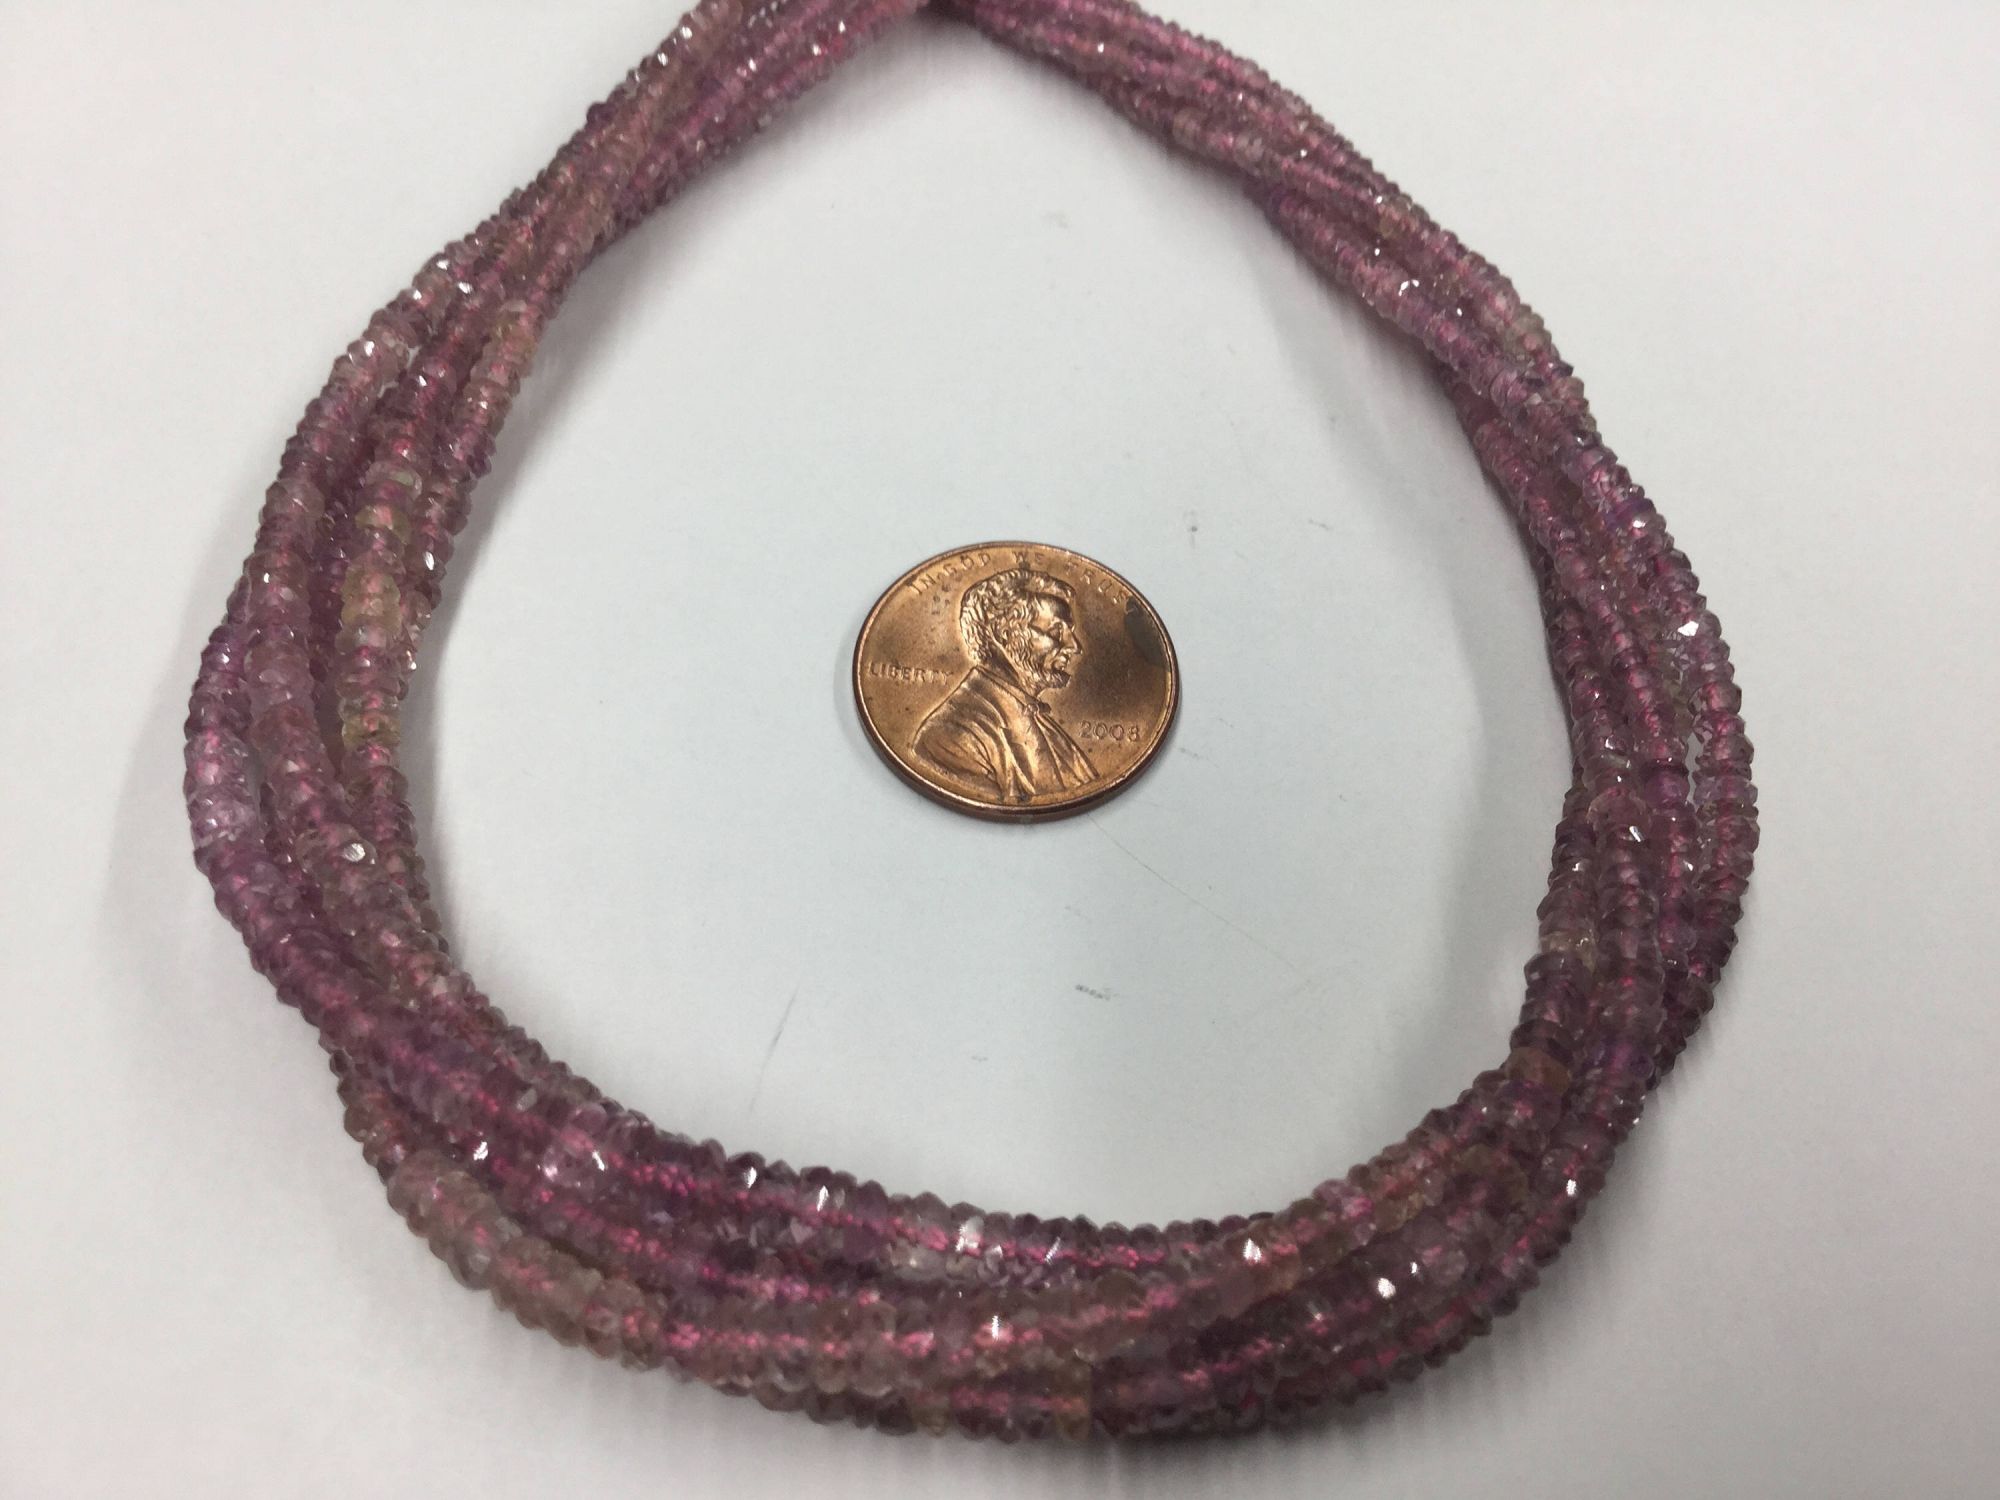 Pink Sapphire Rondelles Faceted